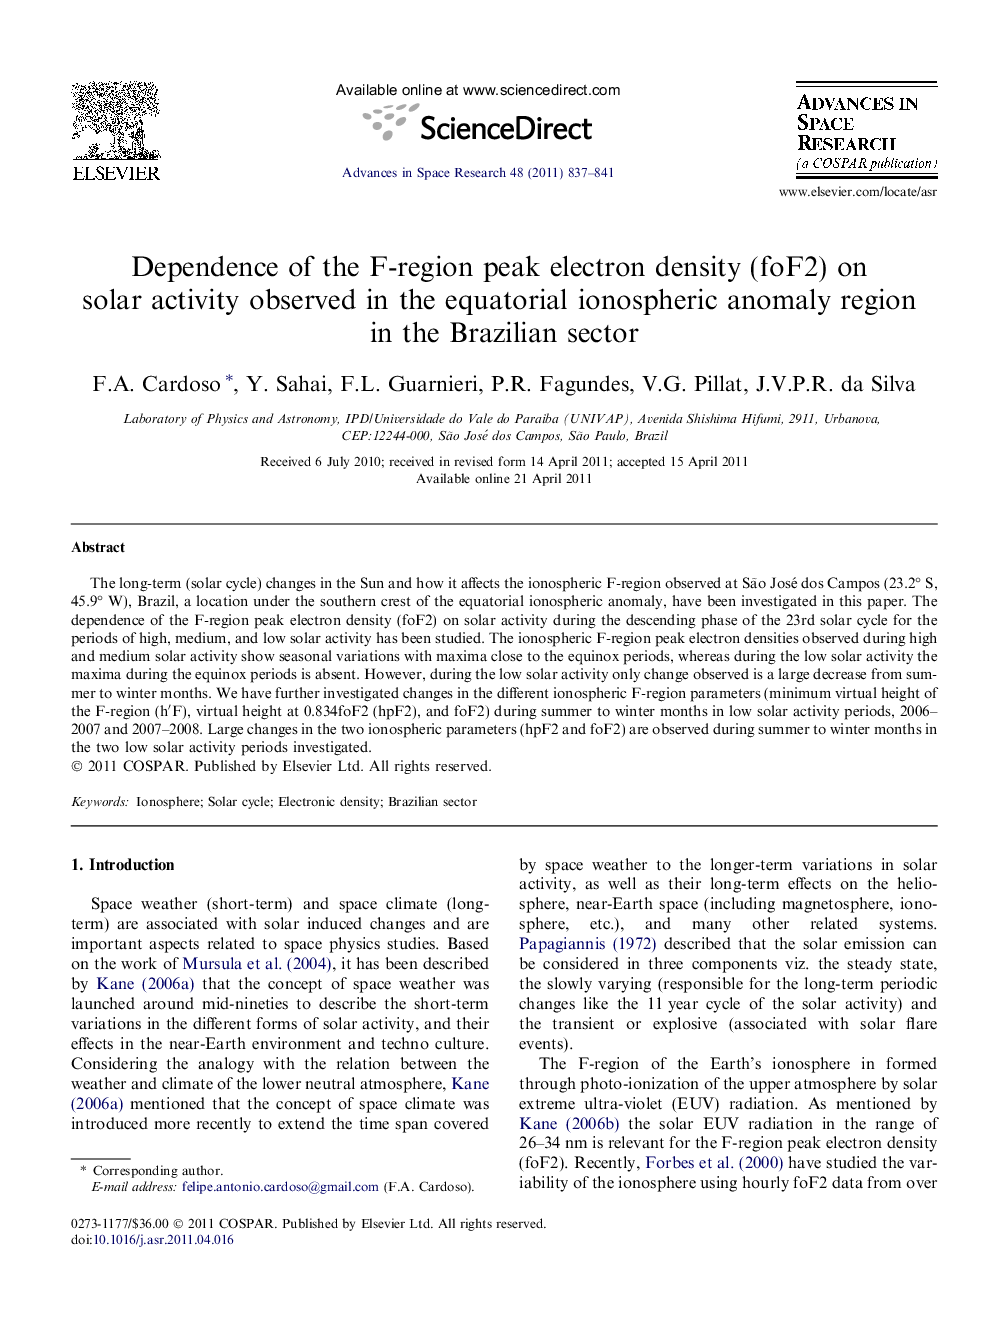 Dependence of the F-region peak electron density (foF2) on solar activity observed in the equatorial ionospheric anomaly region in the Brazilian sector